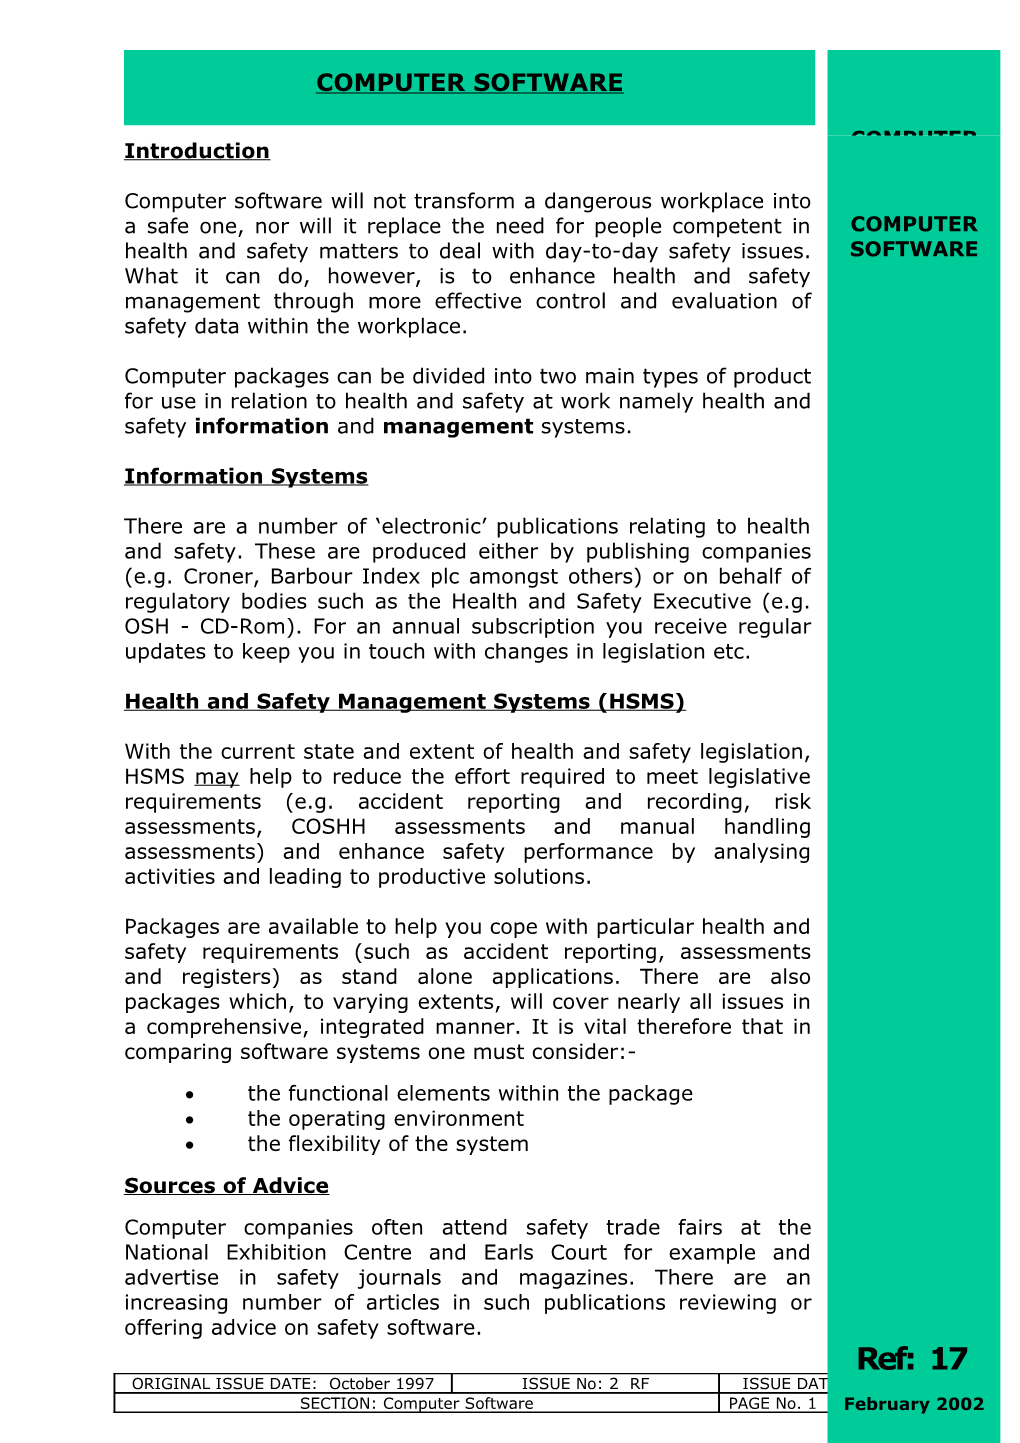 Health and Safety Management Systems (HSMS)